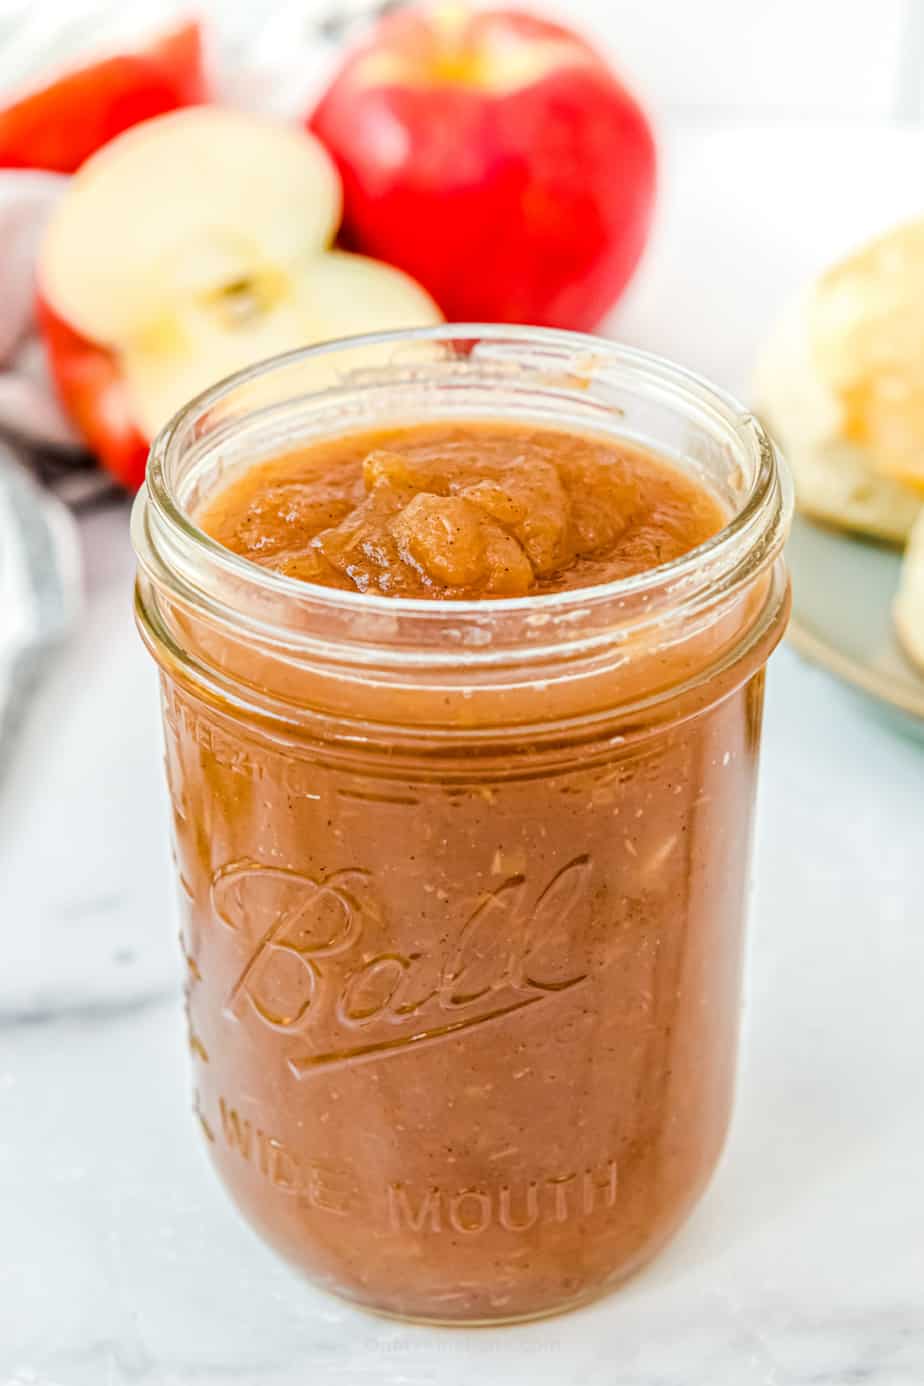 Apple butter in a mason jar with apples and biscuits in the background